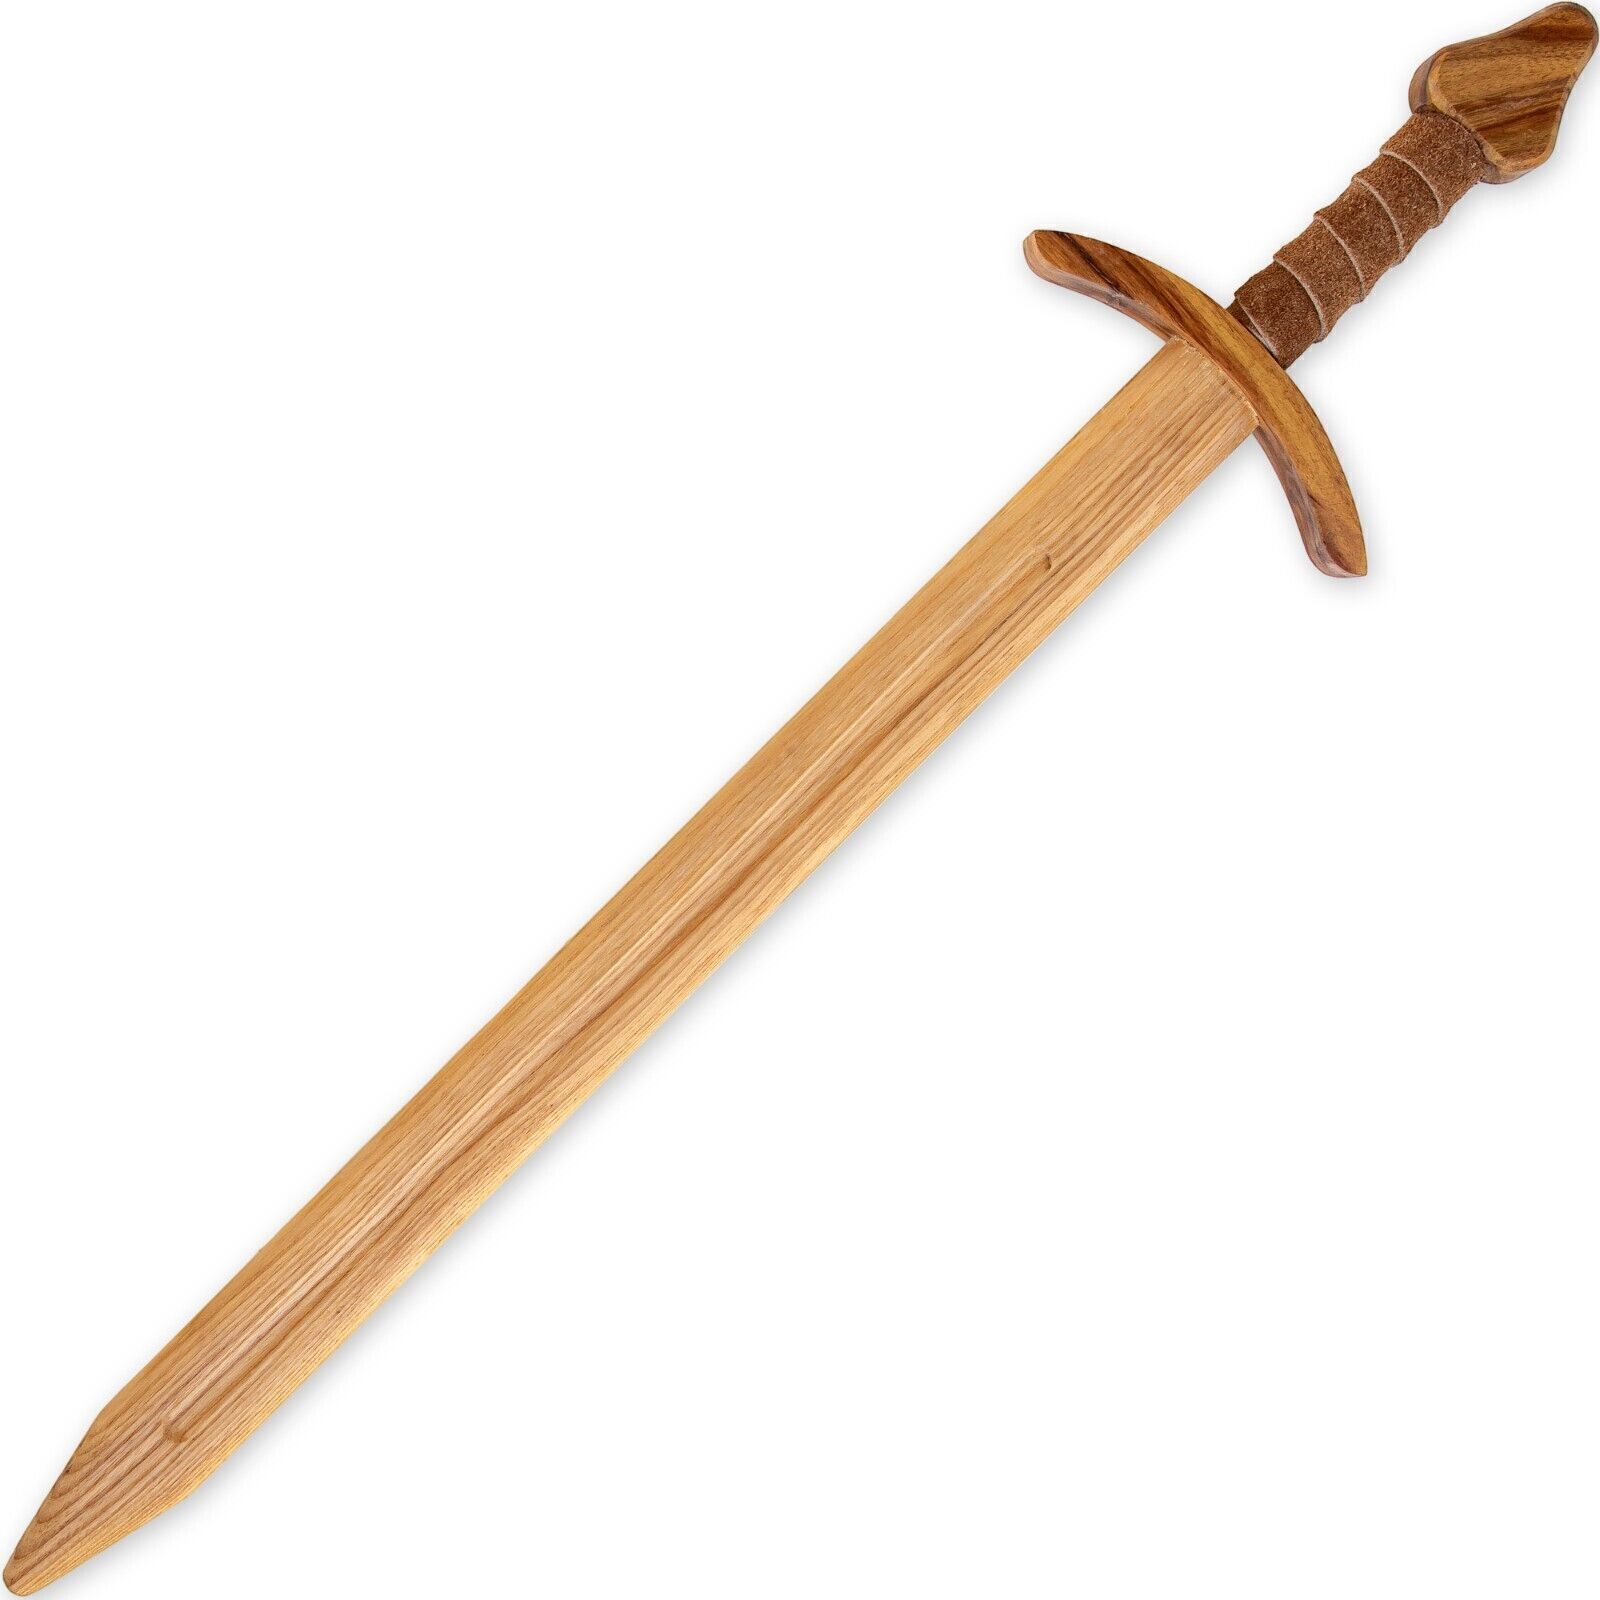 Beech Wood Knightly Practice Cosplay Wooden Sword w/ Leather Wrapped Handle